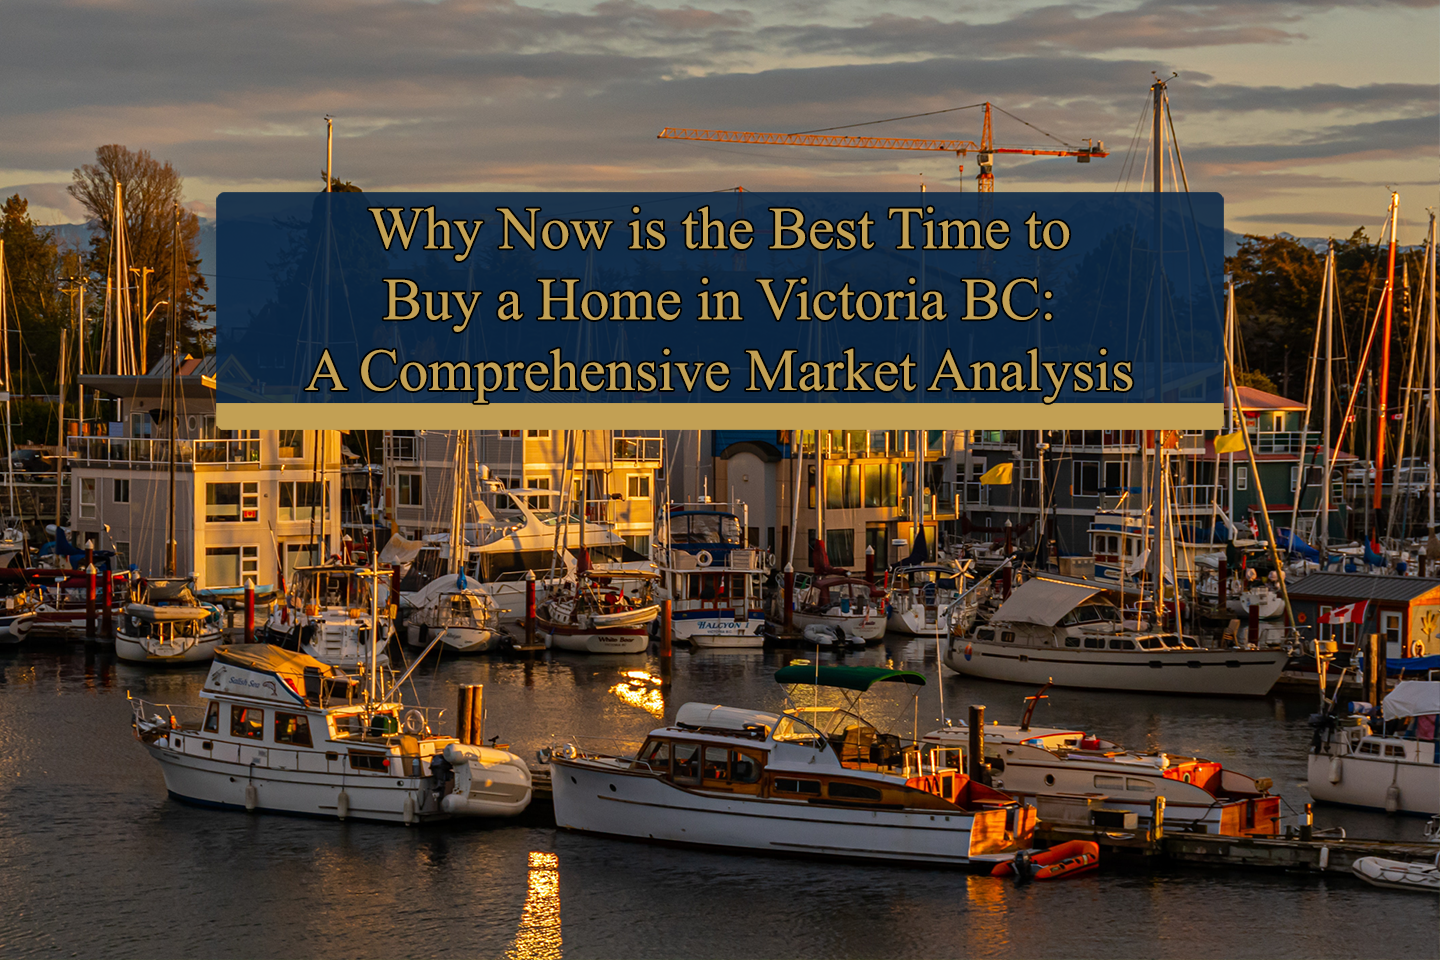 Why now is the best time to buy a home in Victoria BC